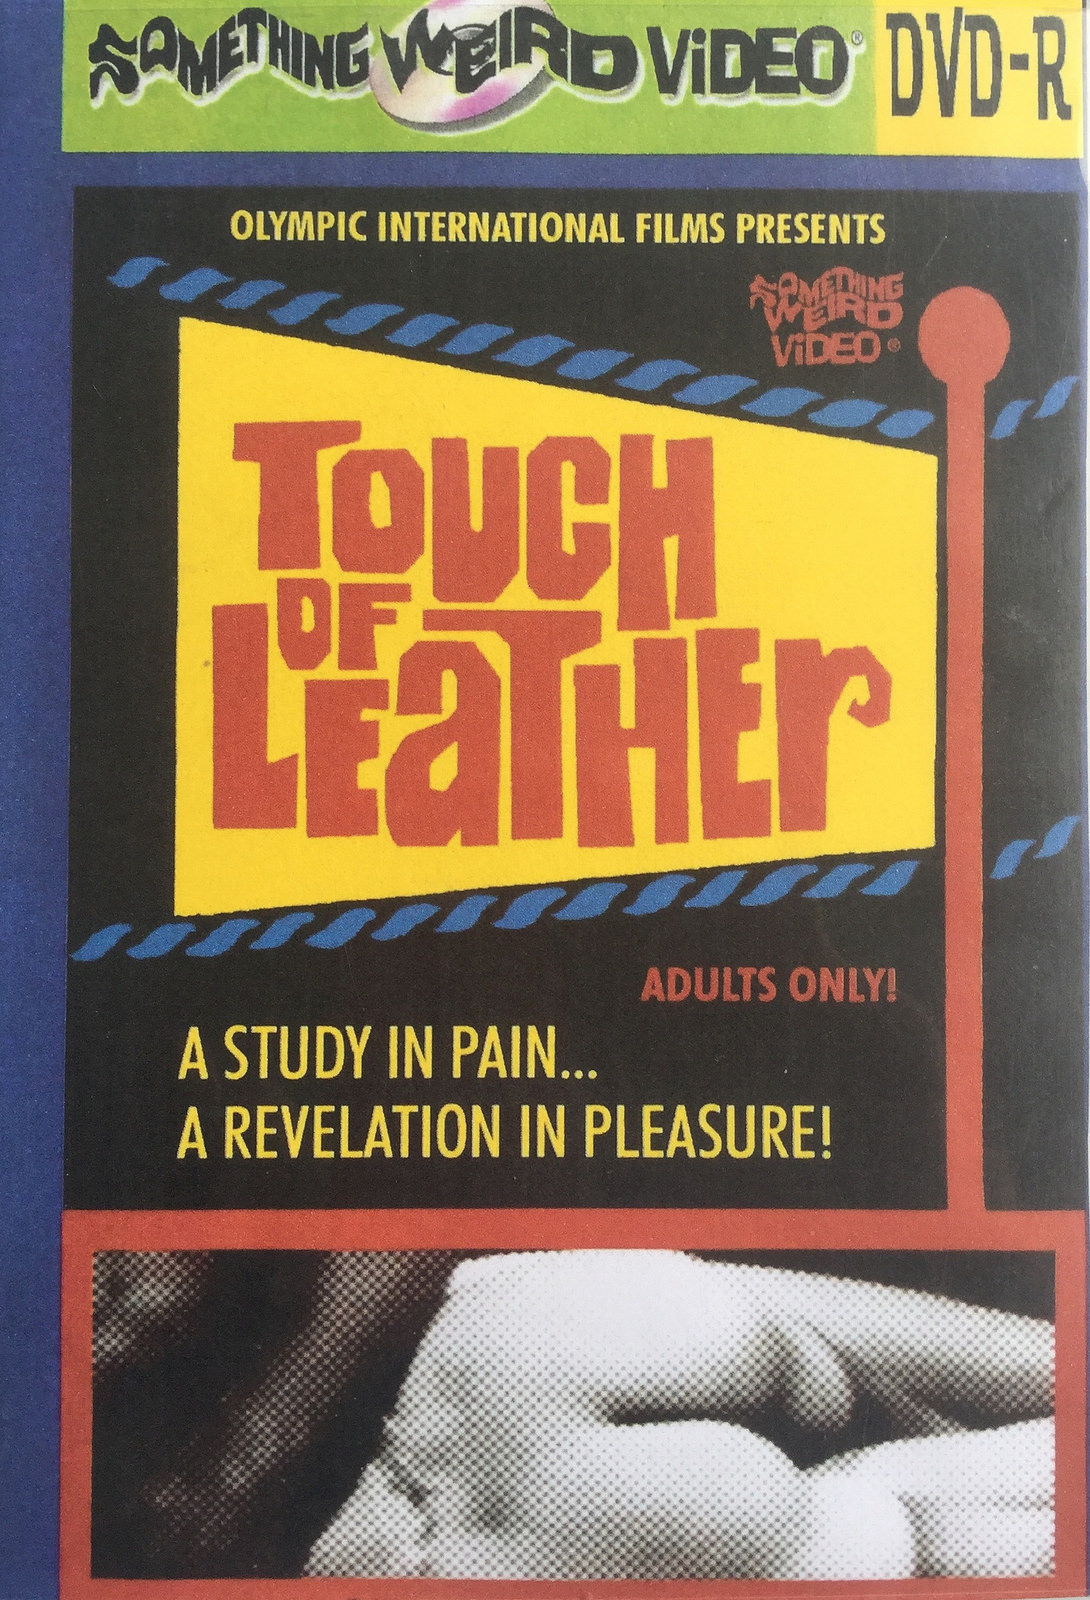 Touch of Leather (1968) Screenshot 3